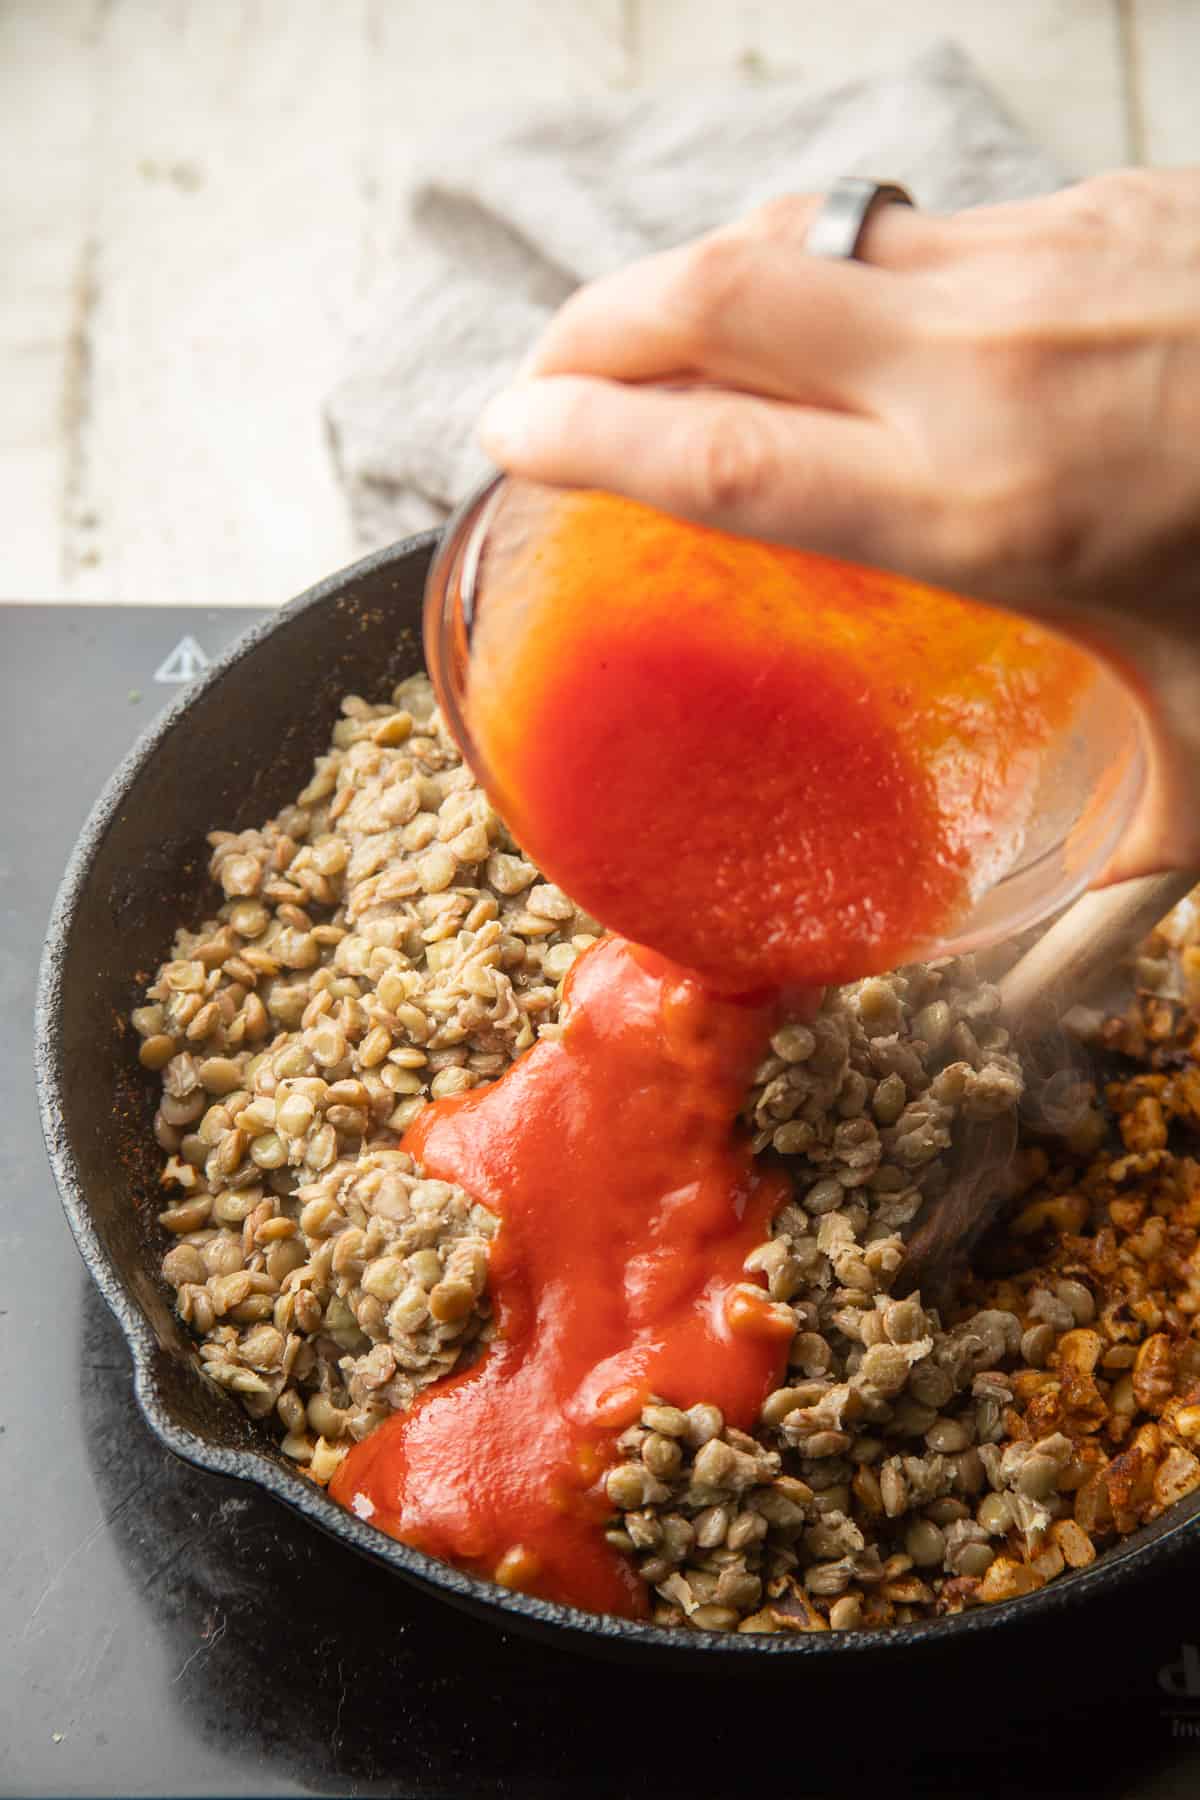 Hand pouring tomato sauce into a skillet of lentil taco filling.